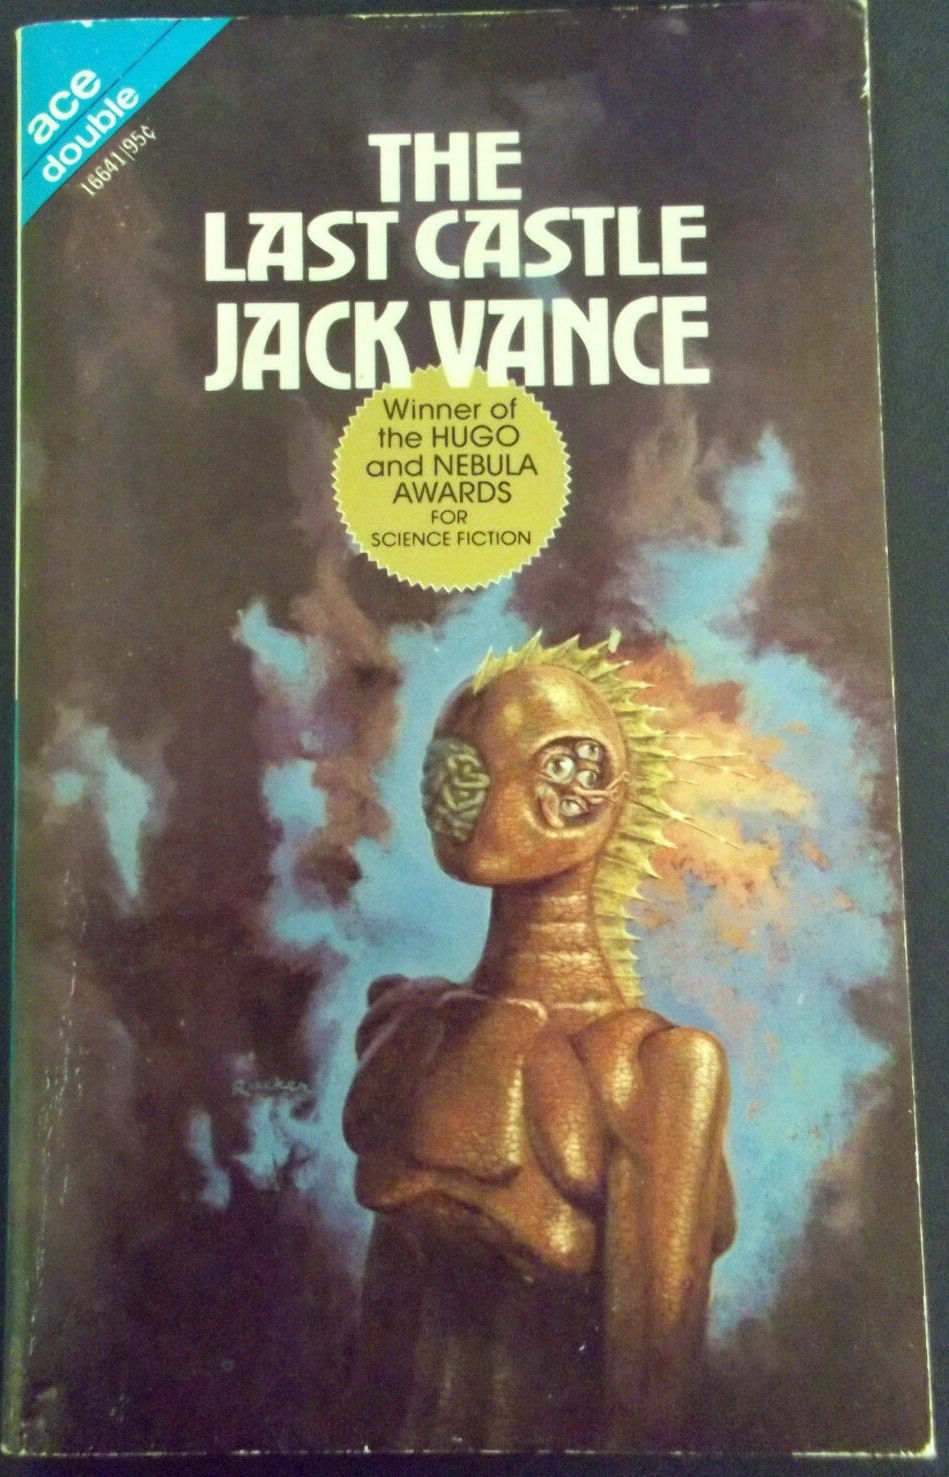 cover image of the 1973 edition of The last castle published by Ace